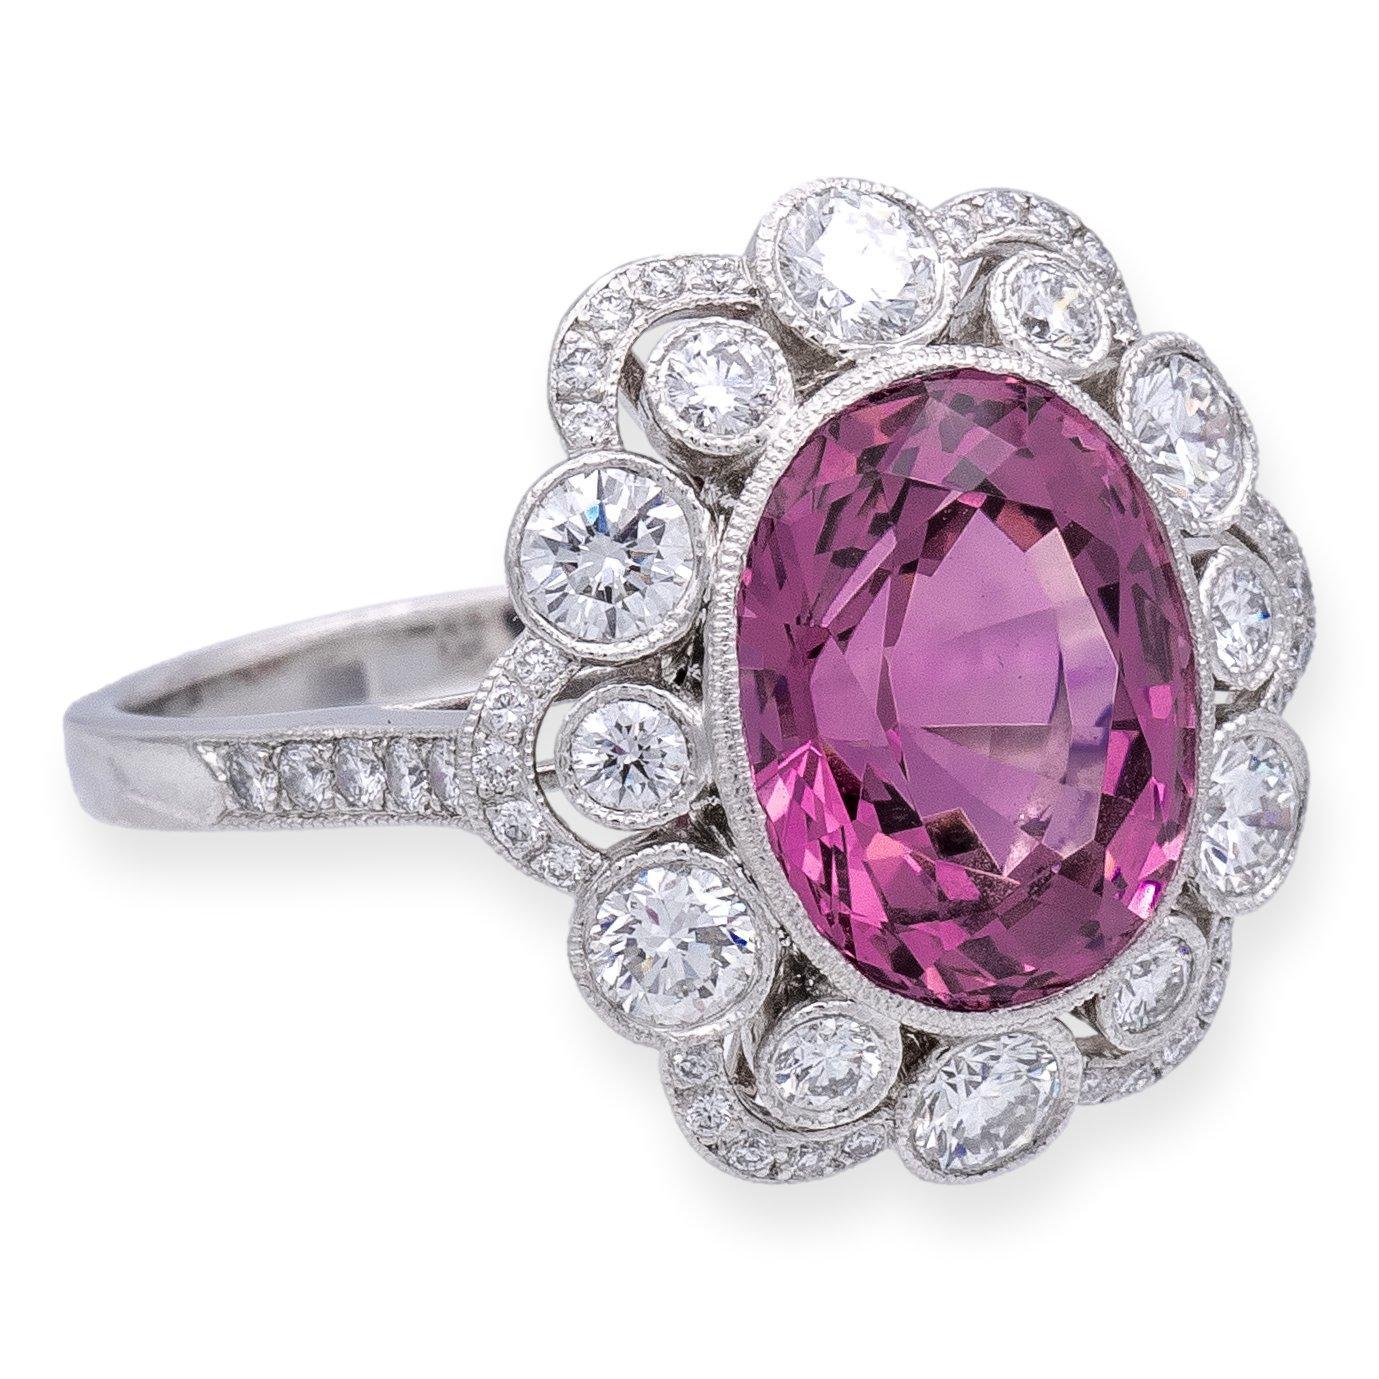 Introducing a Rare Vintage Tiffany & Co. Diamond Ring, a true masterpiece of timeless elegance and exquisite craftsmanship. This extraordinary ring boasts a stunning oval 5.20 carat faceted pink spinel center stone, radiating with a captivating hue